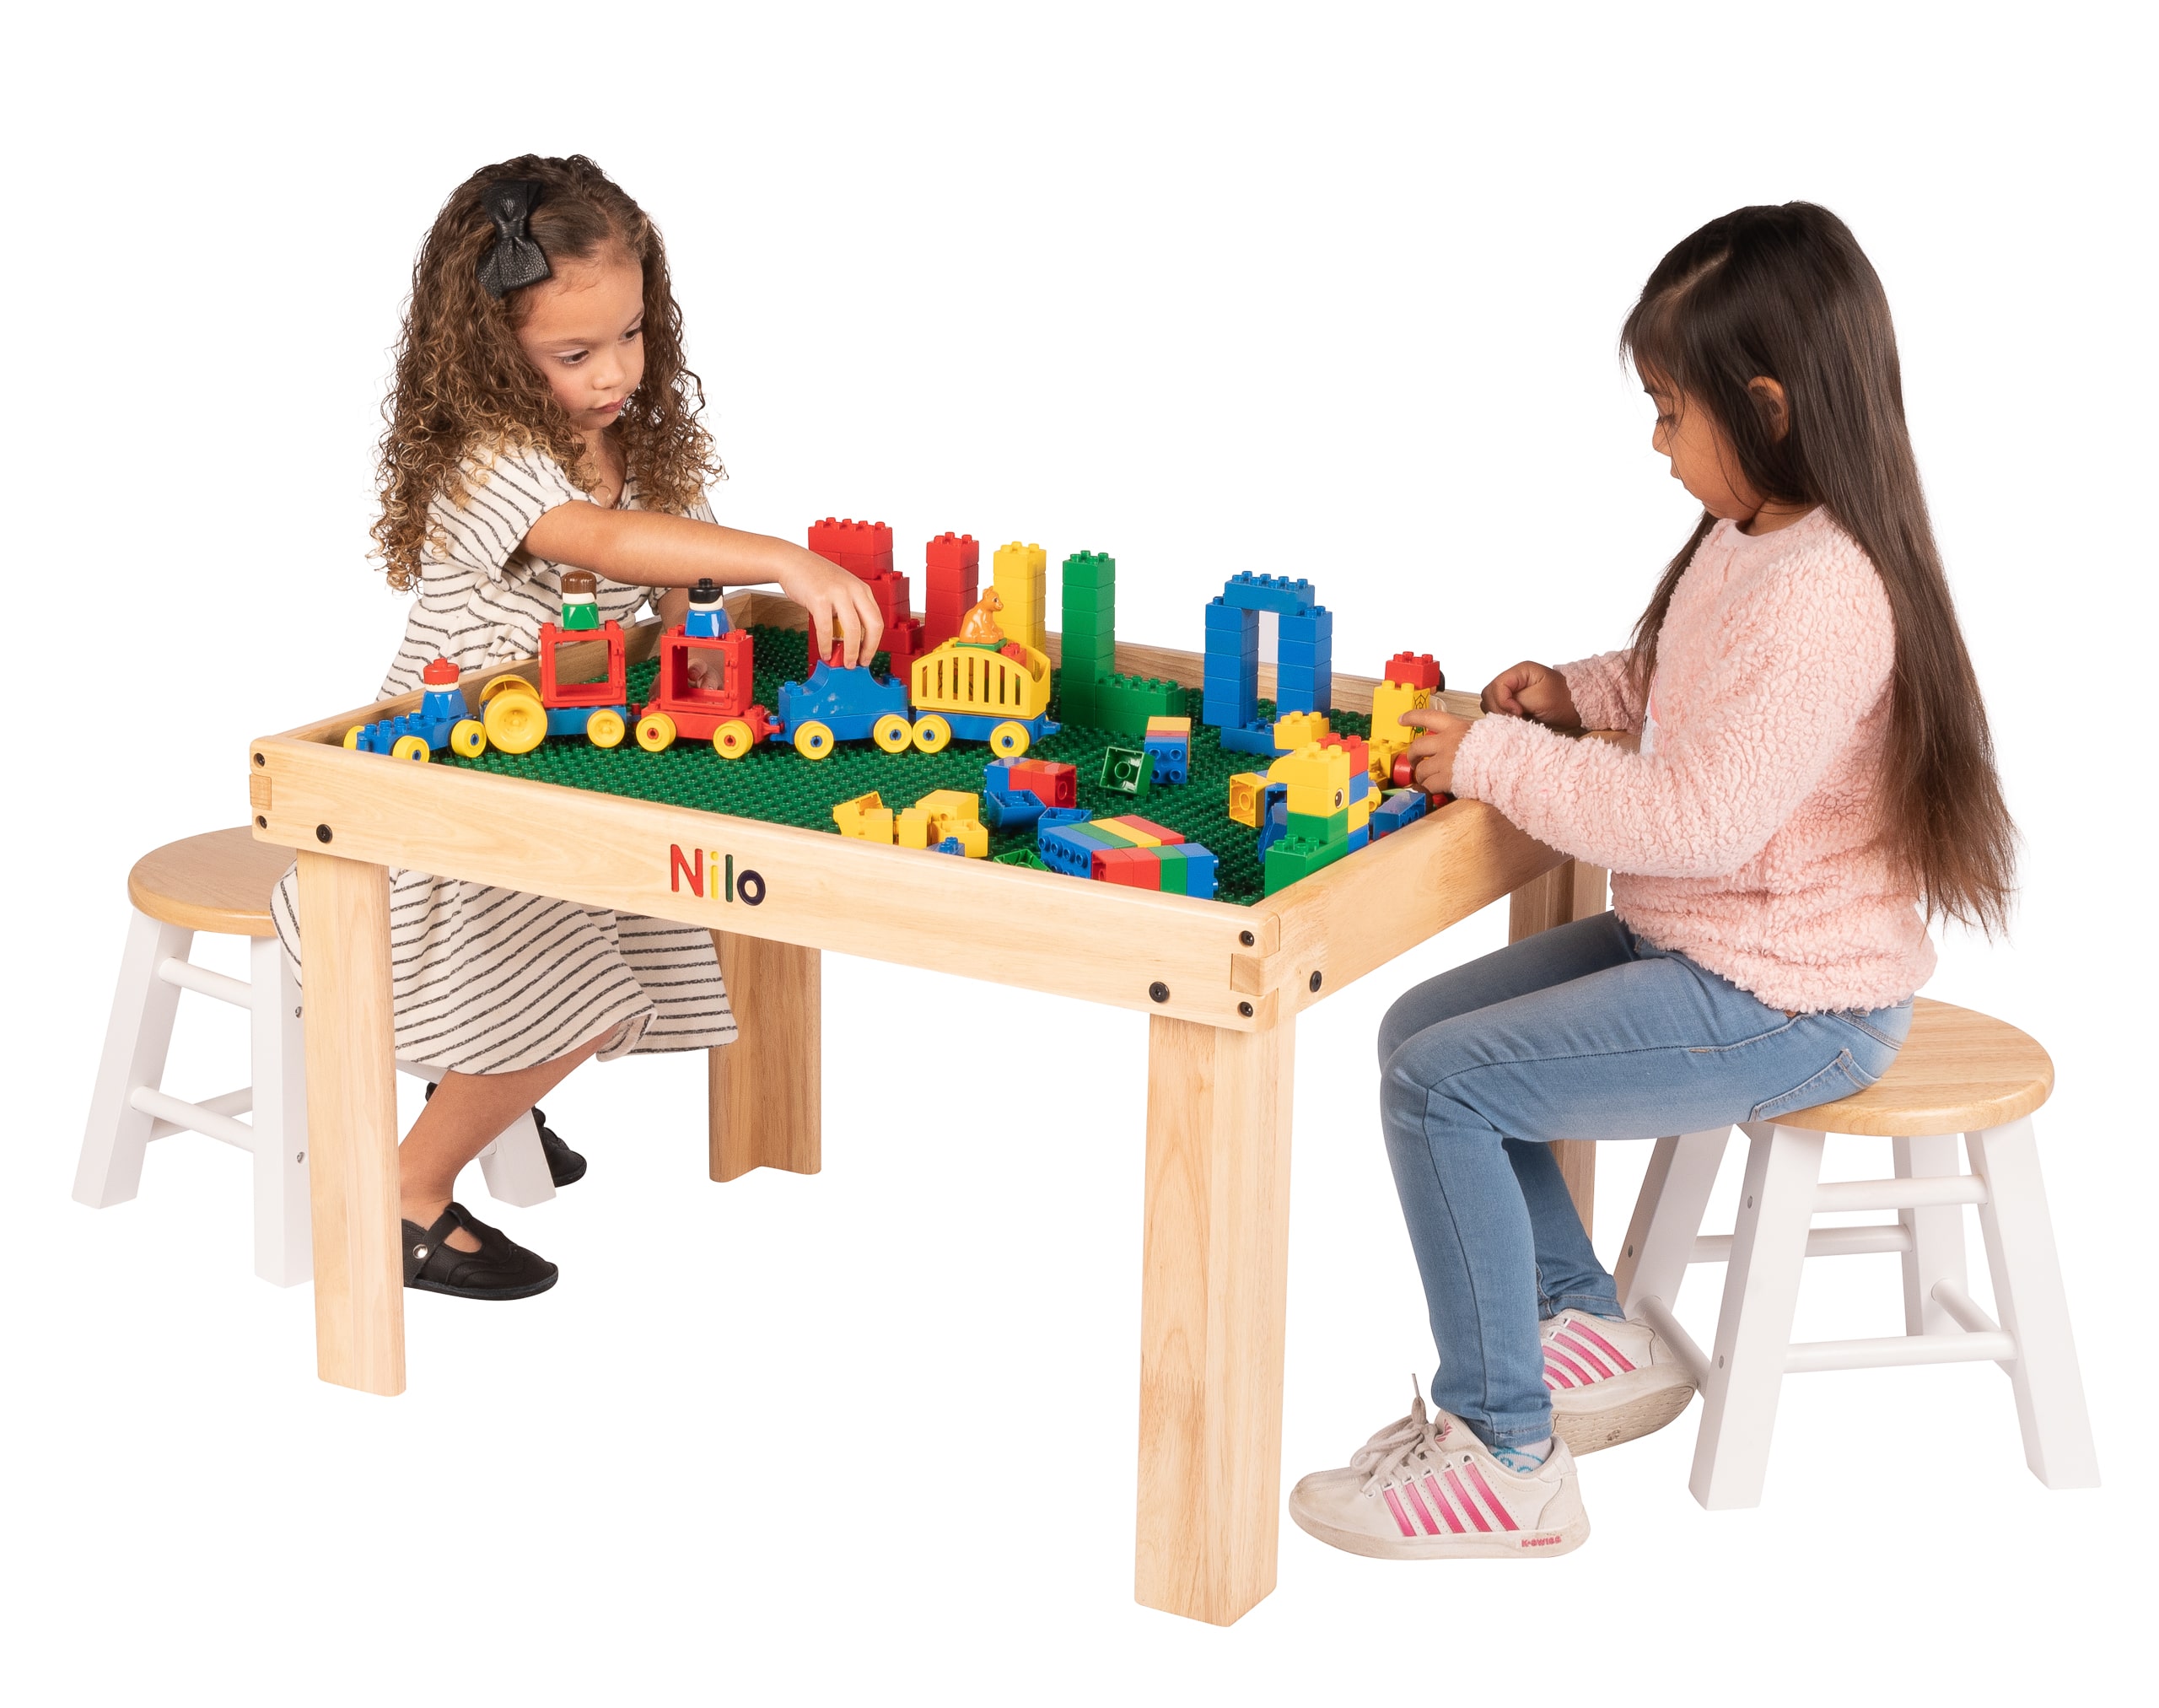 lego table, duplo table, nilo table, play table, activity table